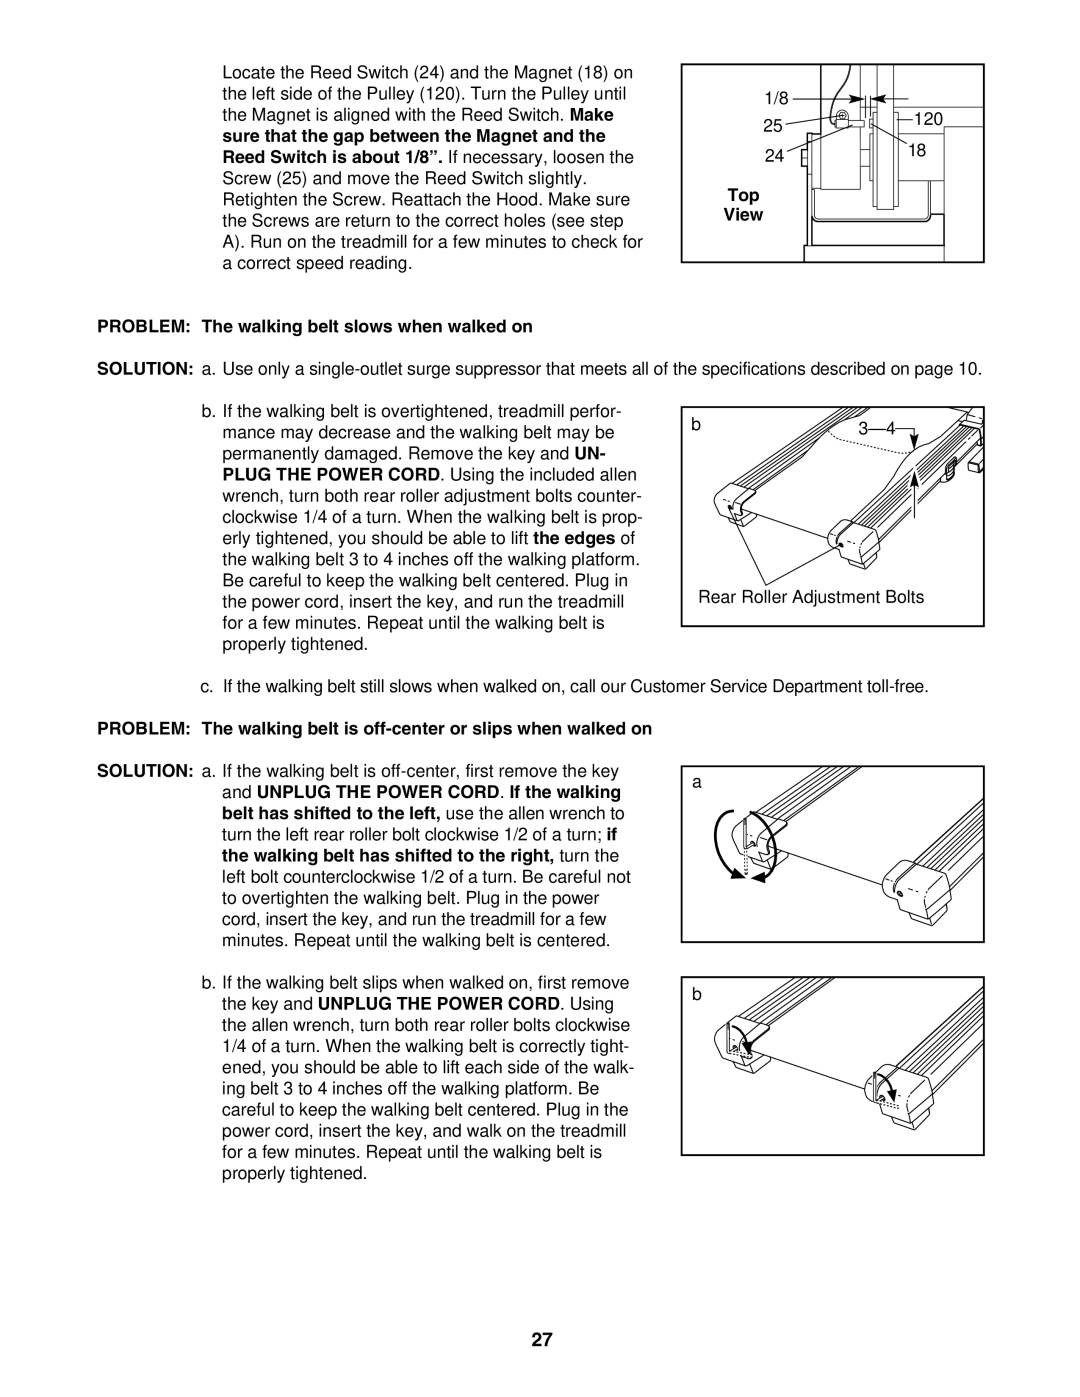 ProForm DTL52942 user manual Top View Problem The walking belt slows when walked on 